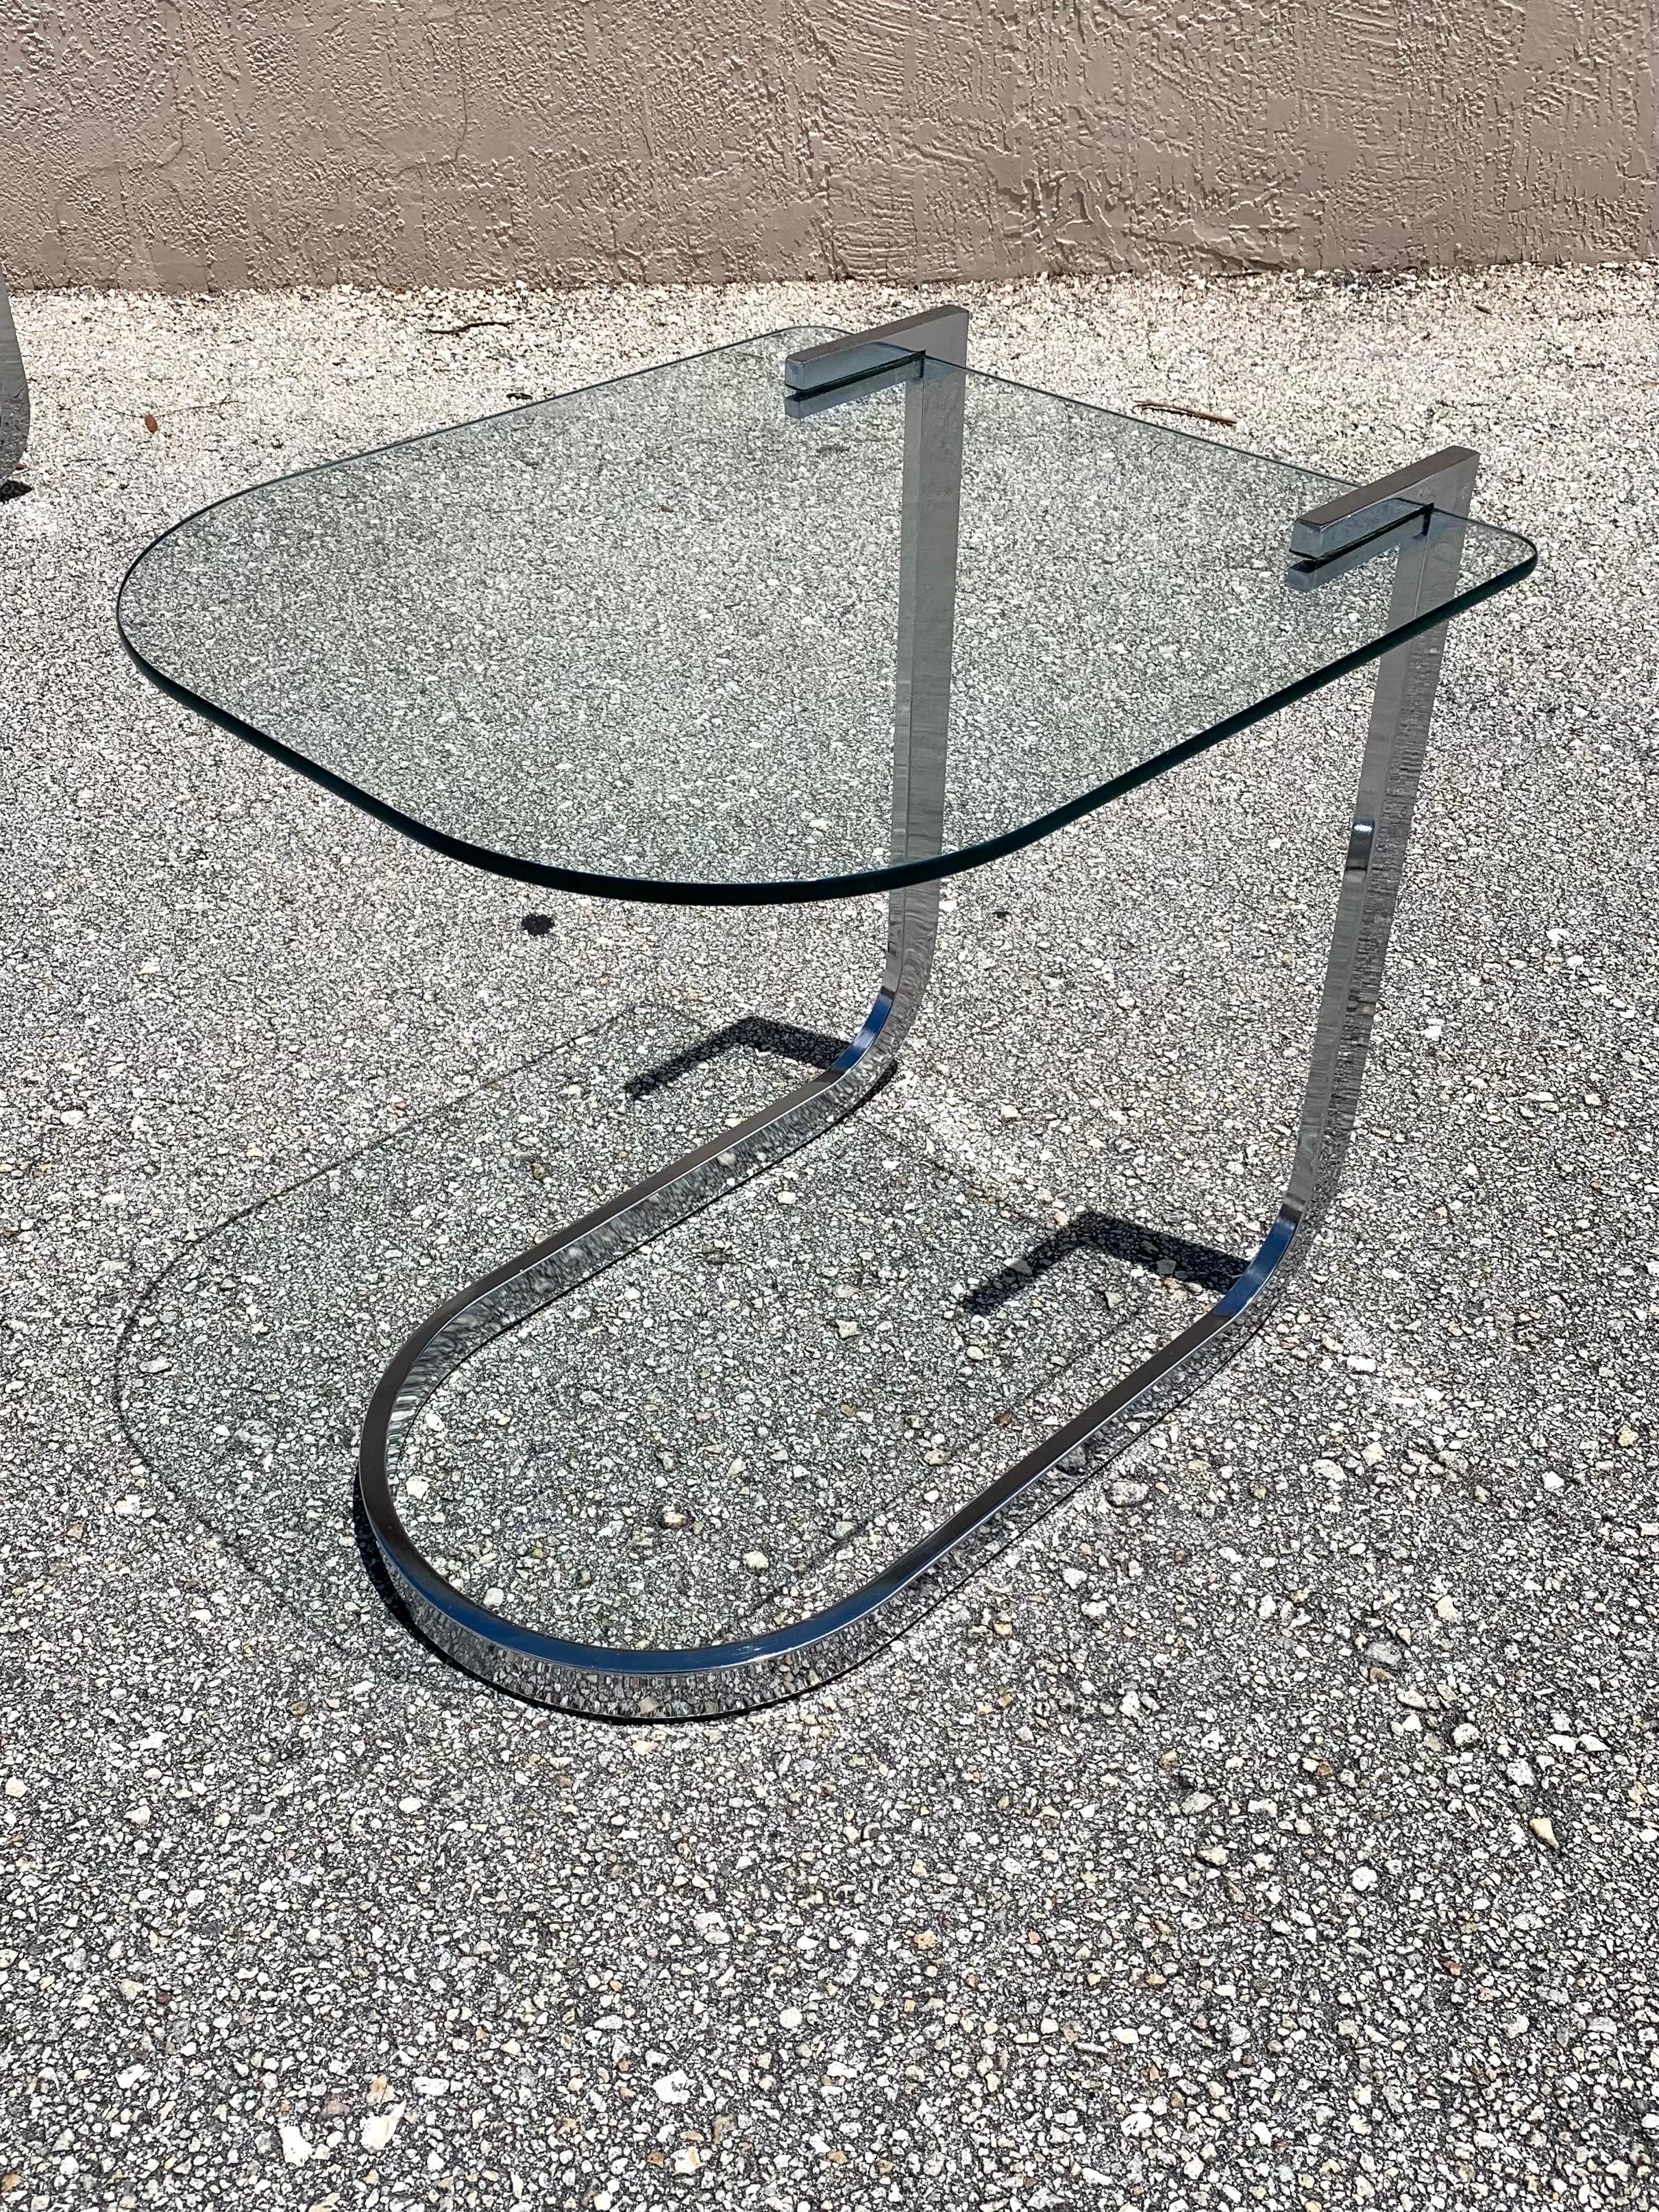 20th Century Mid-Century Modern Design Institute of America Chrome and Glass Nesting Tables For Sale